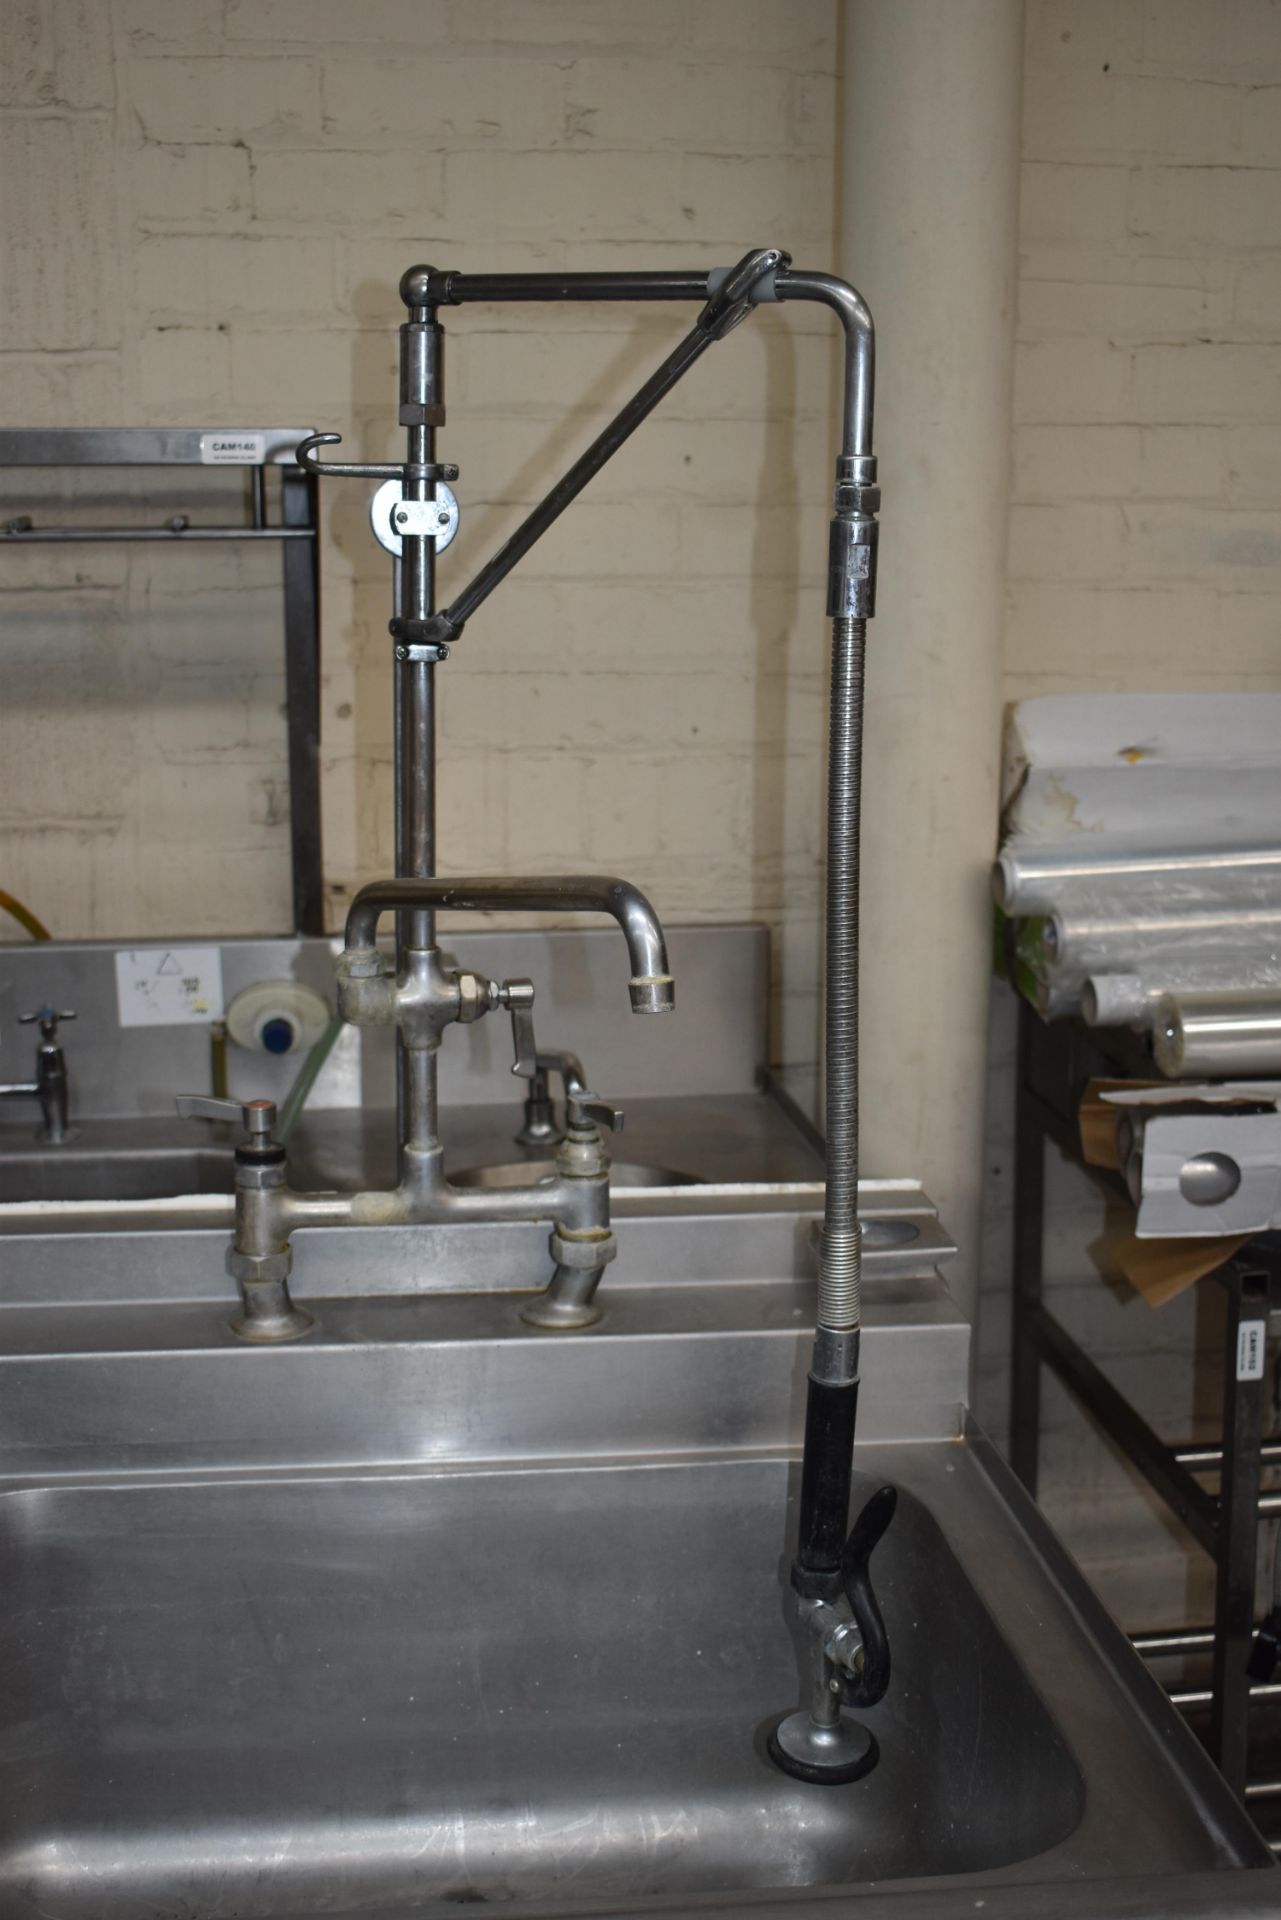 1 x Stainless Steel Commercial Wash Basin Unit With Twin Sink Bowl and Drainers, Mixer Taps, Spray H - Image 11 of 12